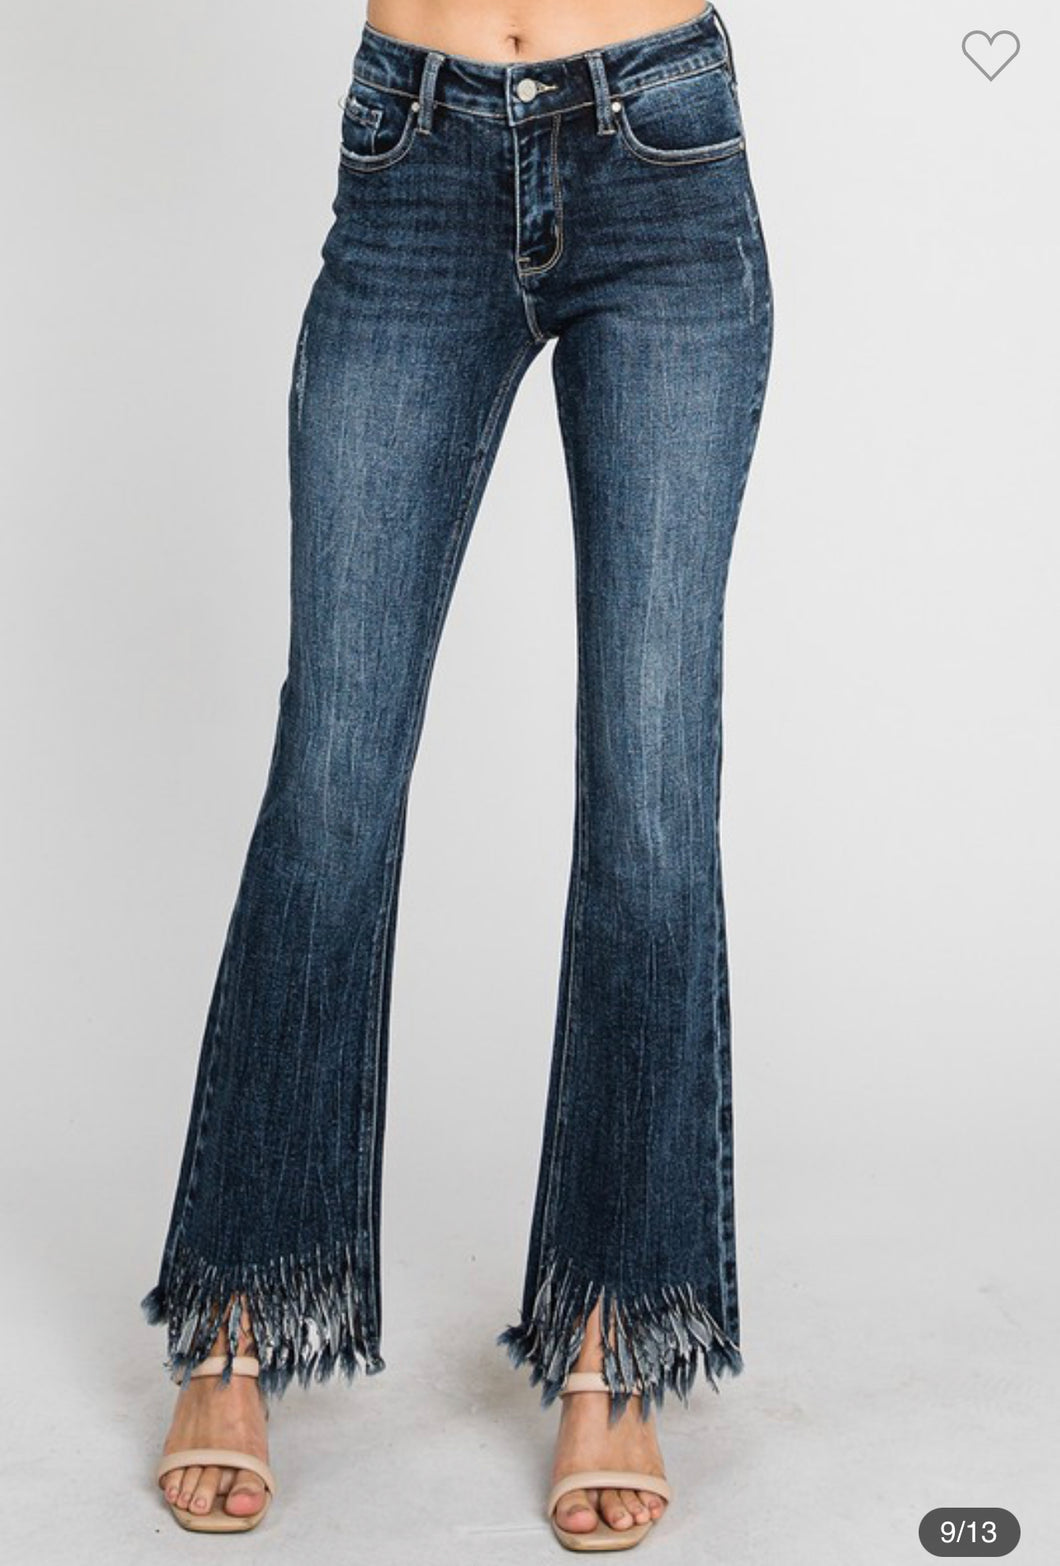 Petra Mid Rise Classic Bootcut with Fringed Hem Jeans SKUPBC